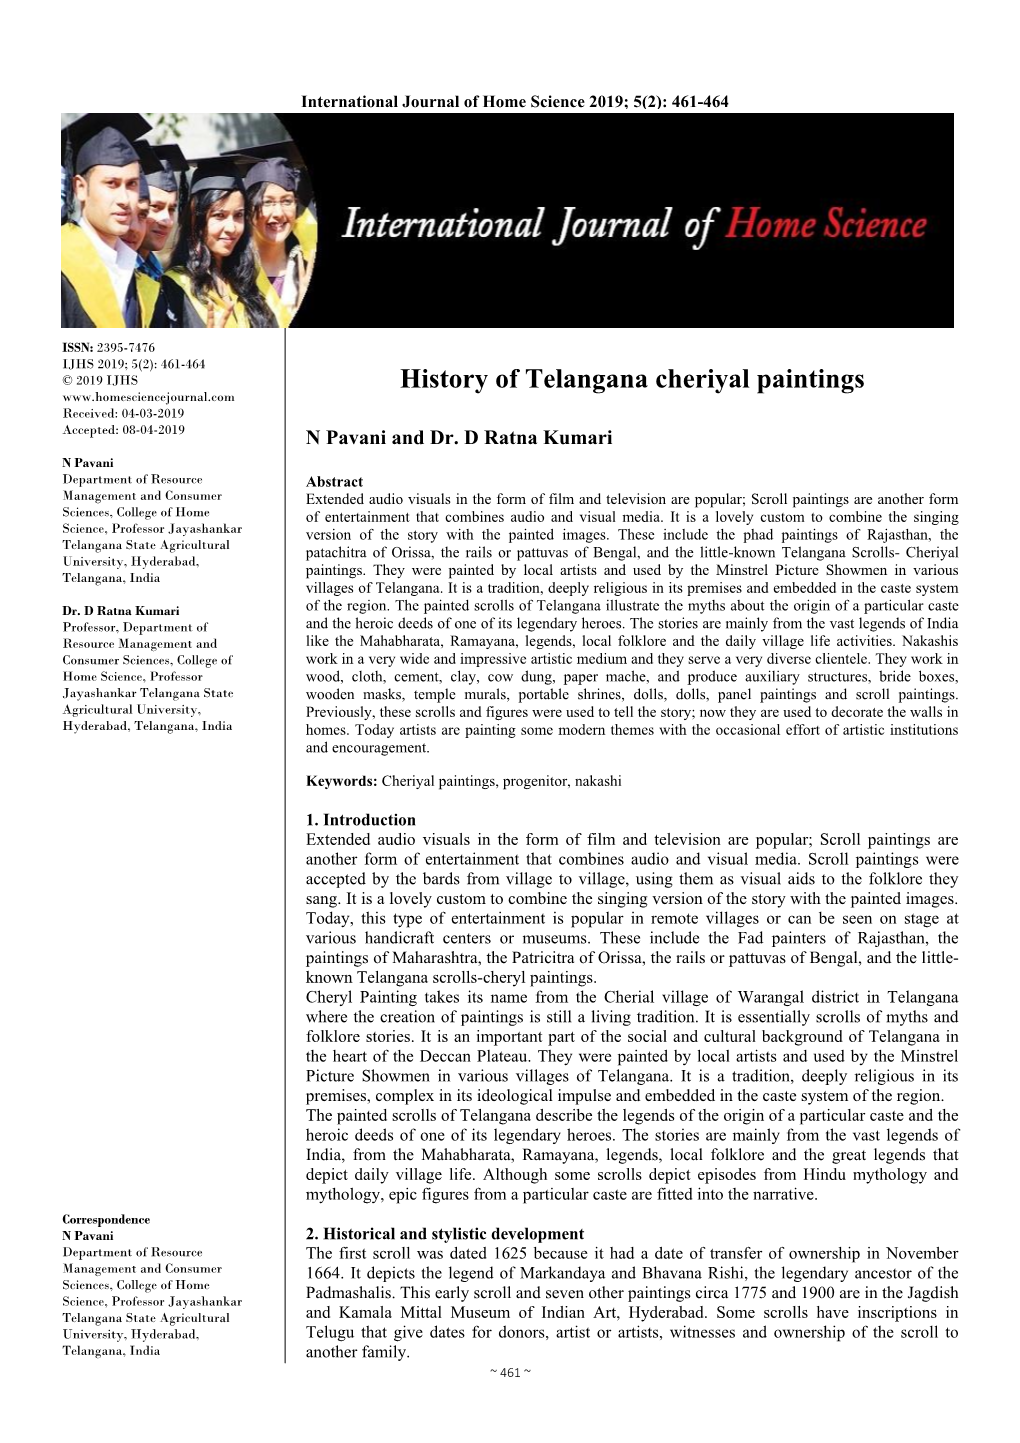 History of Telangana Cheriyal Paintings Received: 04-03-2019 Accepted: 08-04-2019 N Pavani and Dr